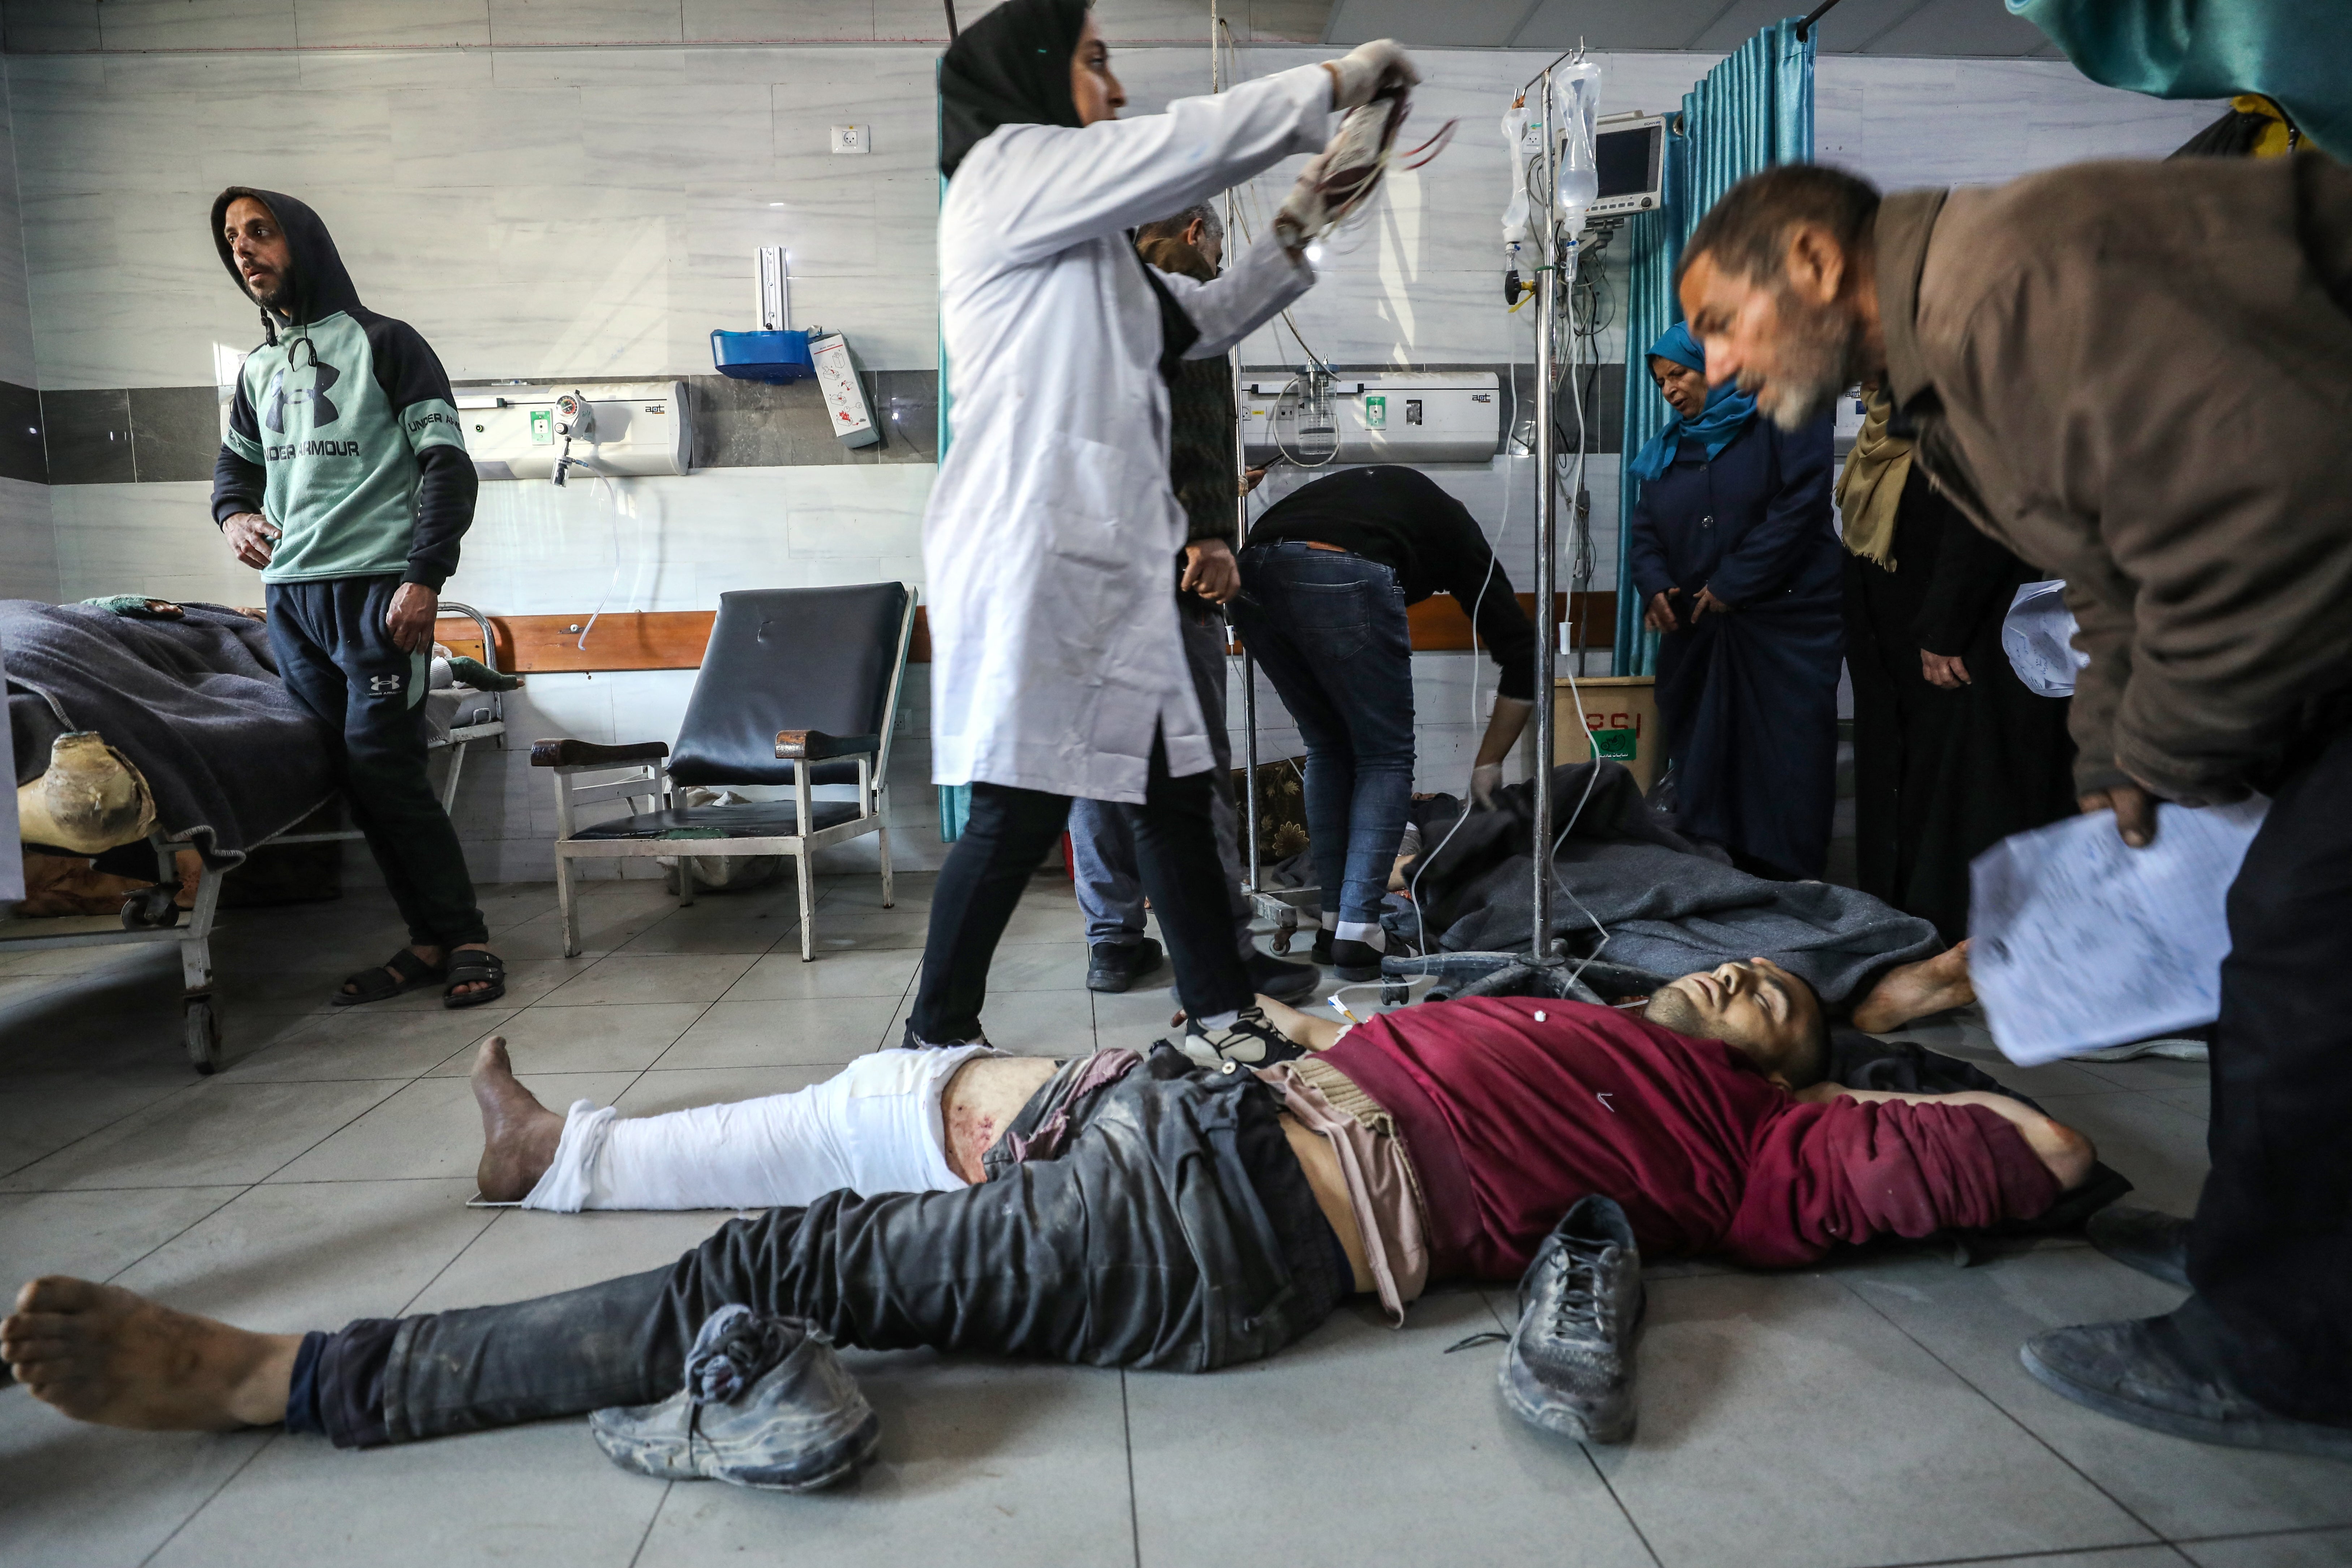 Palestinians receive medical care at Kamal Edwan Hospital in Beit Lahia, in the northern Gaza Strip, after Israeli forces opened fire on an aid truck convoy